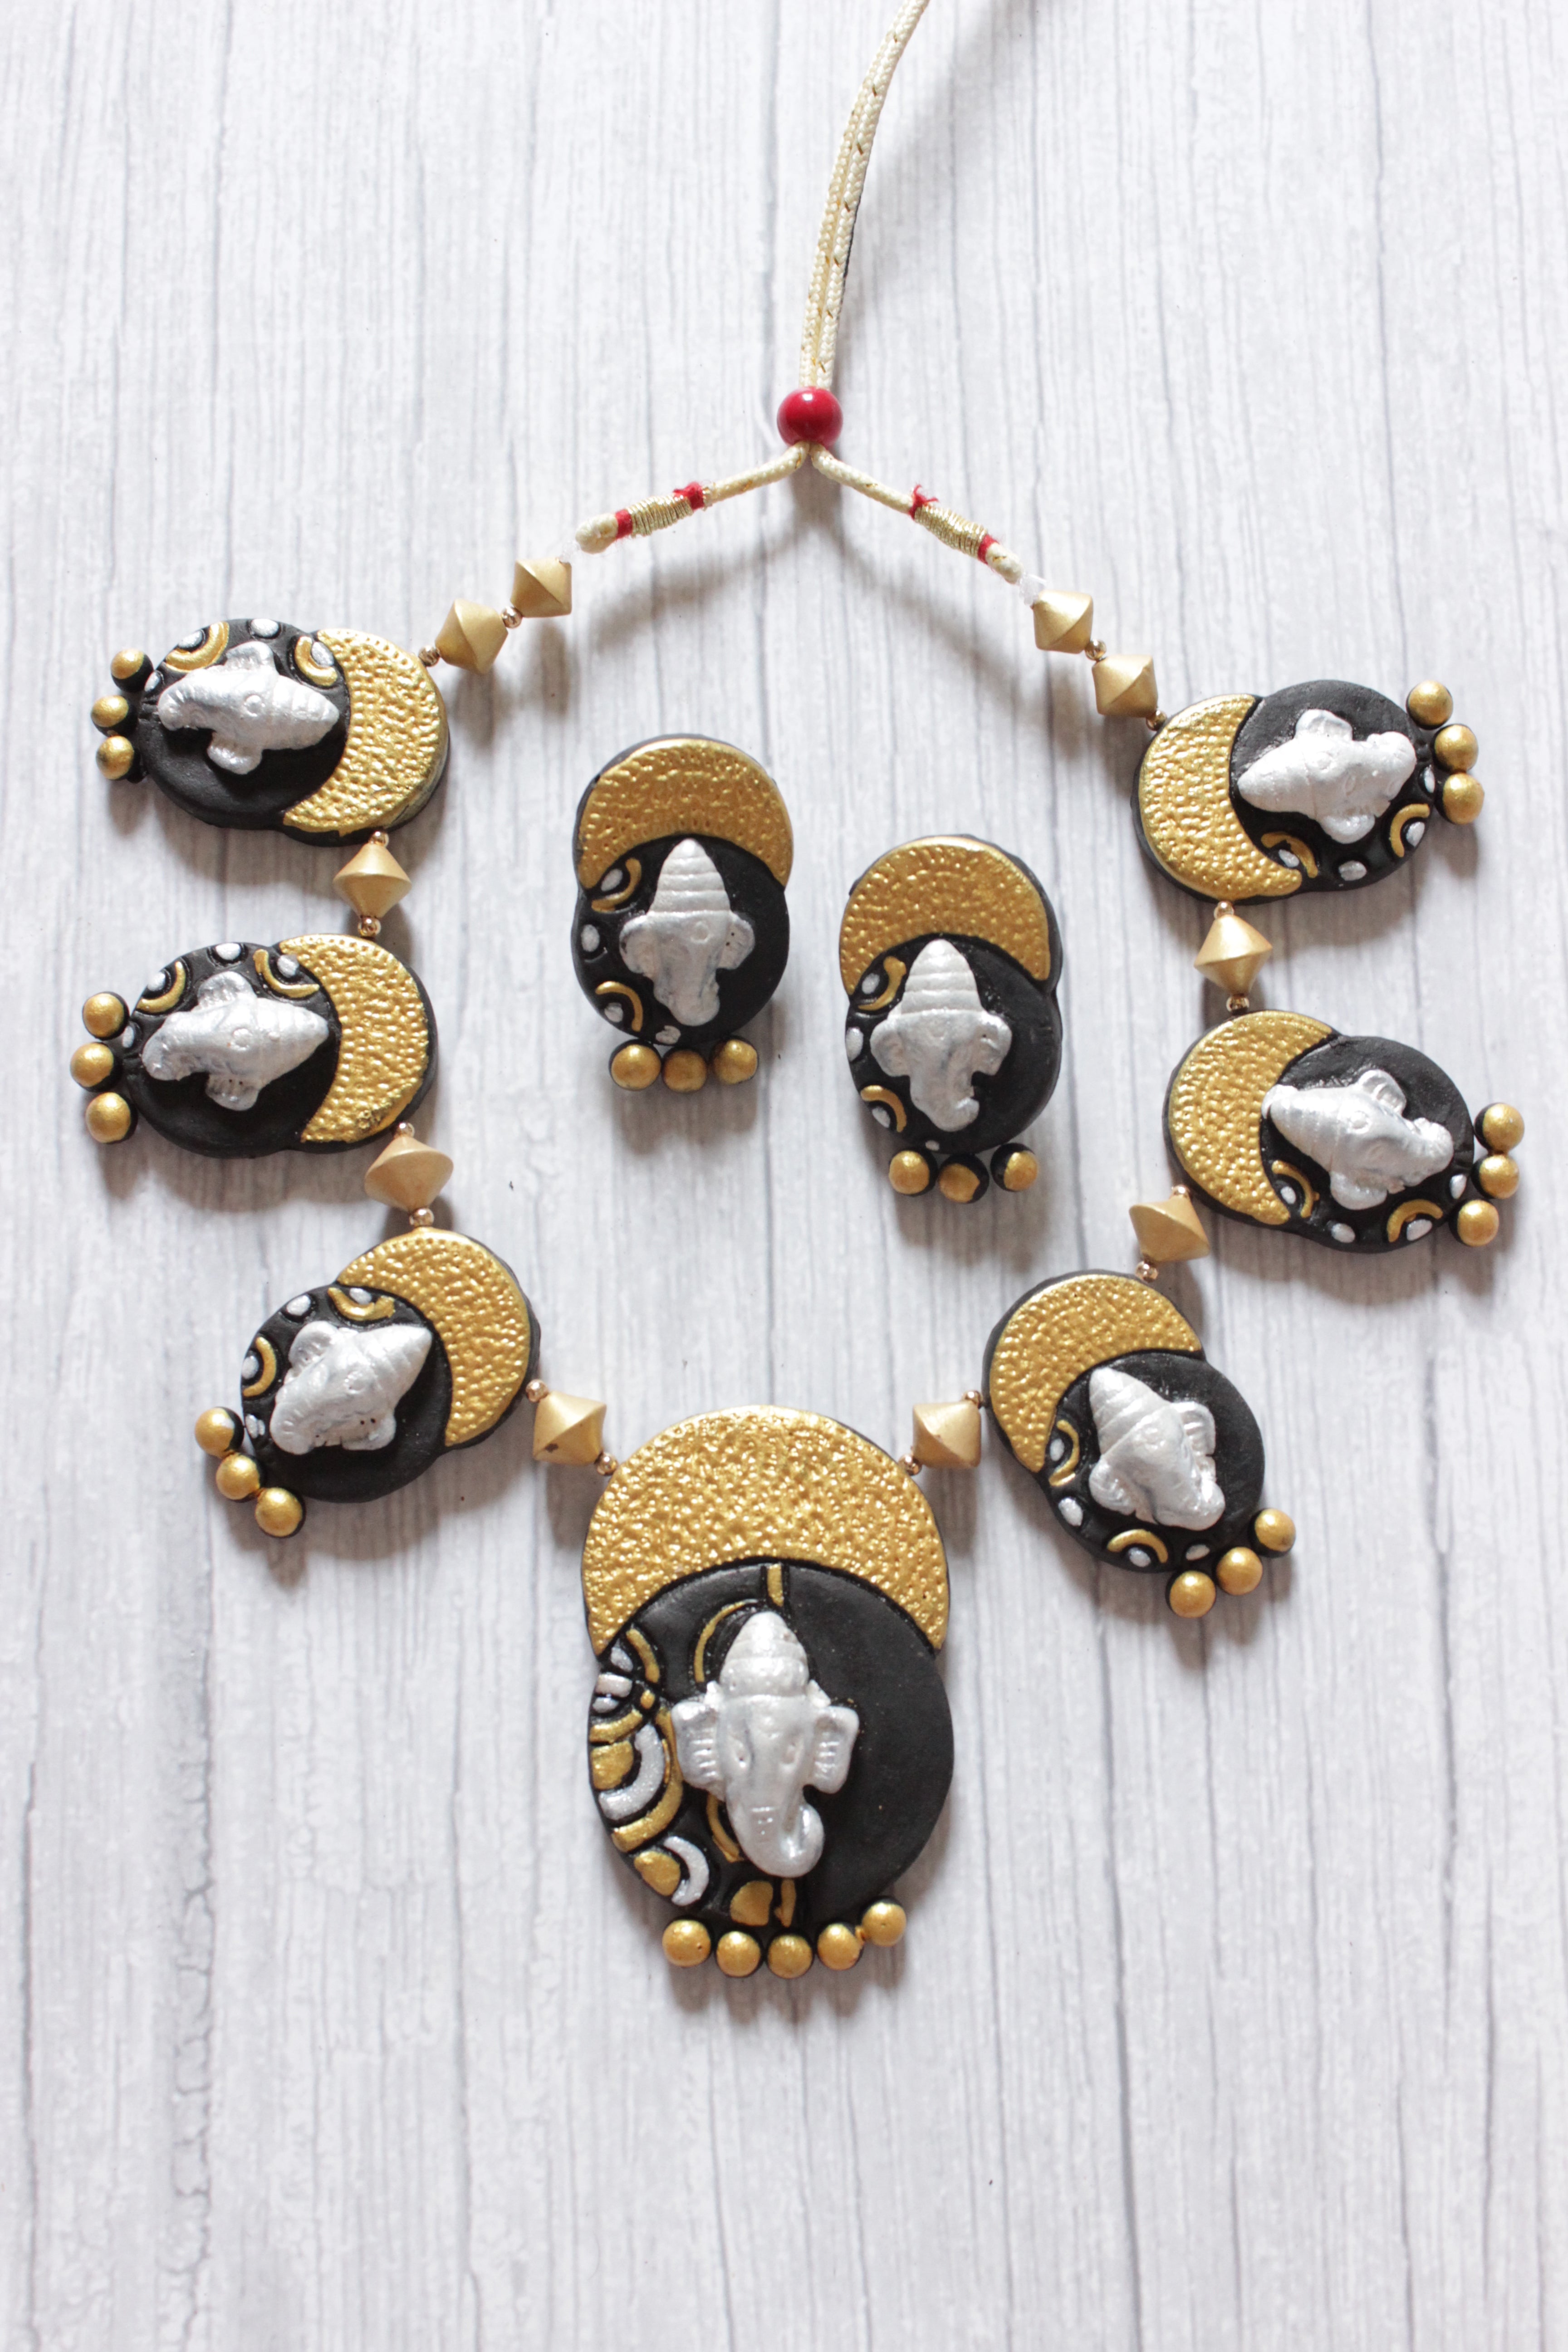 Black & Golden Ganesha Motif Handcrafted Choker Style Terracotta Clay Necklace Set